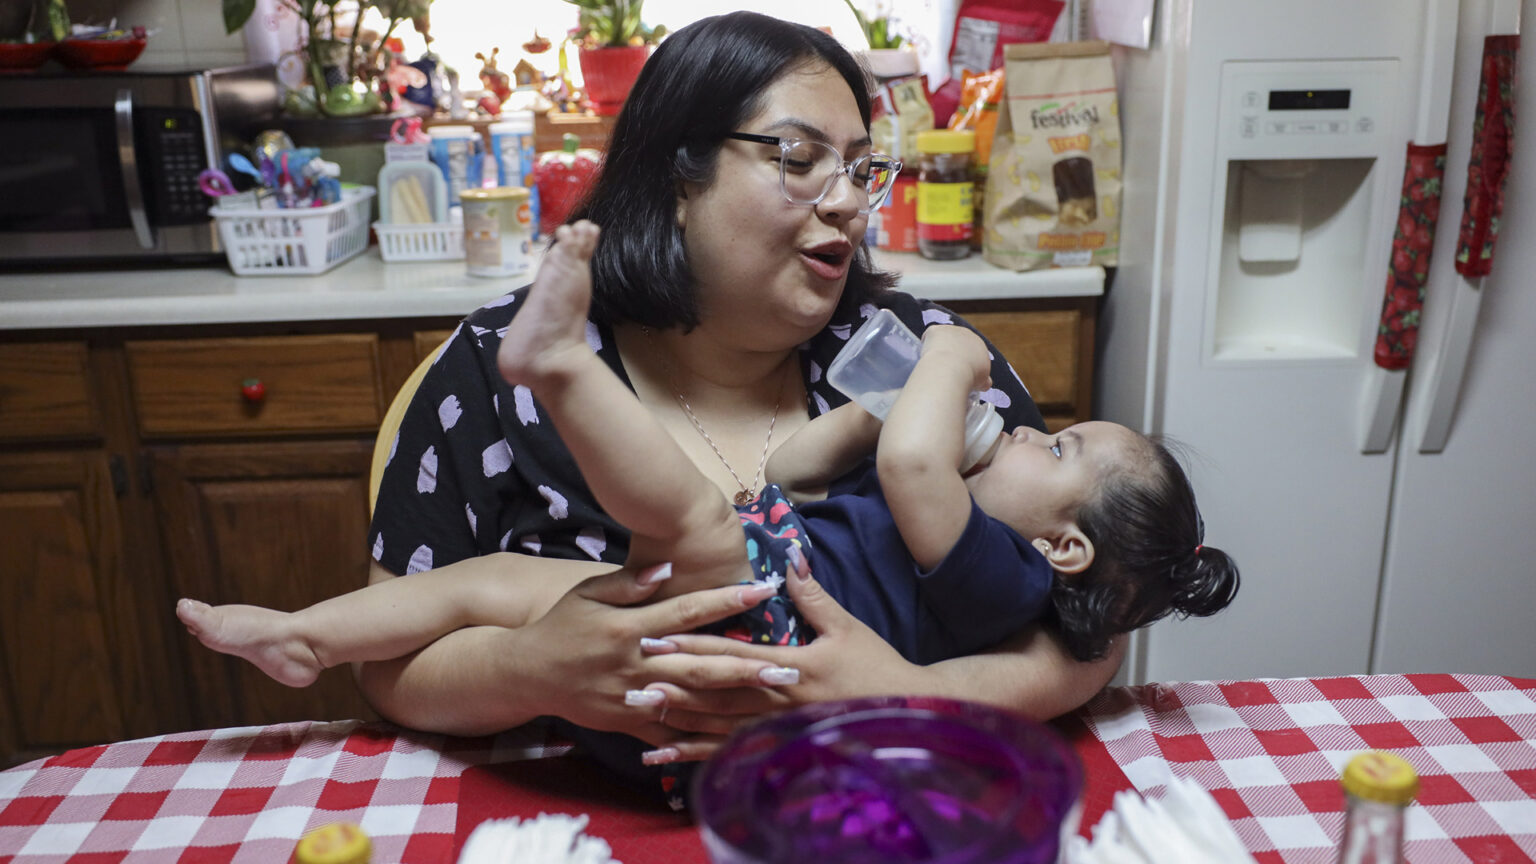 Raquel Urbina holds Adaliz Angeles at a kitchen table as the infant feeds on formula from a bottle, with a kitchen counter, cabinets and refrigerator in the background.